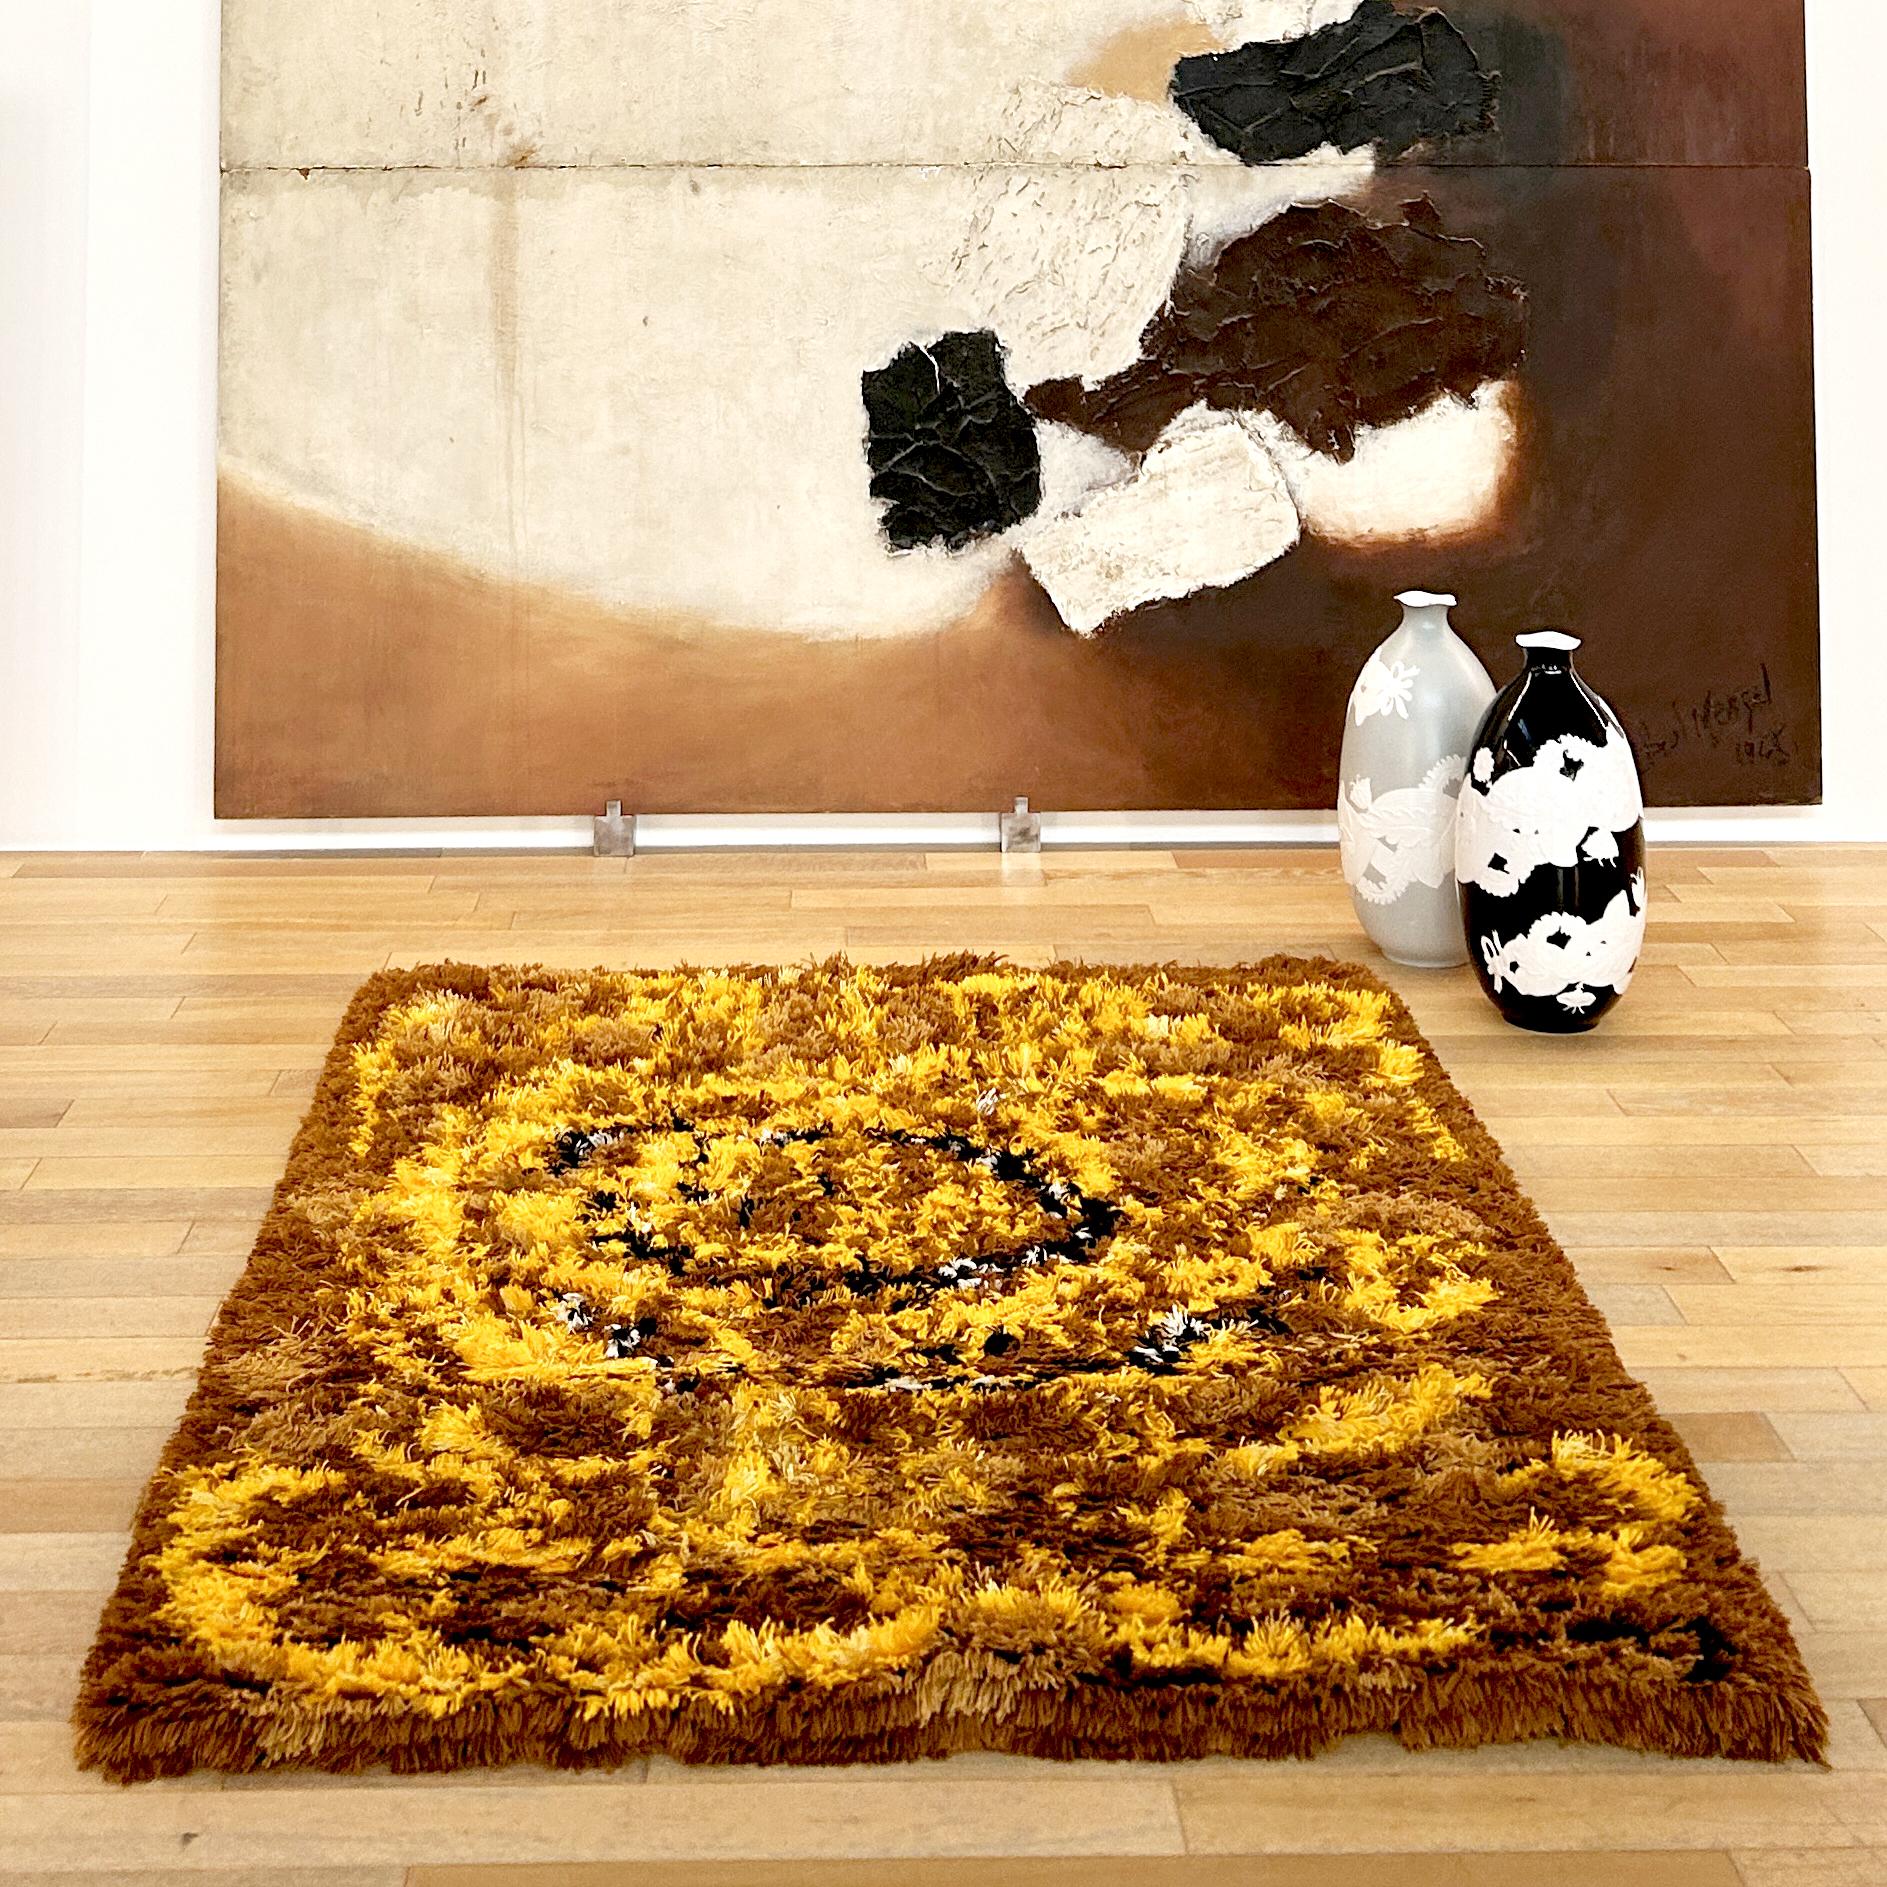 Acrylic/wool blend rug, Dal Lago manufactory, Venice 1960s/70s. Informal decoration based on brown and beige, with yellow, black and white. Stock, never used, the carpet has been cleaned and is therefore ready for use.